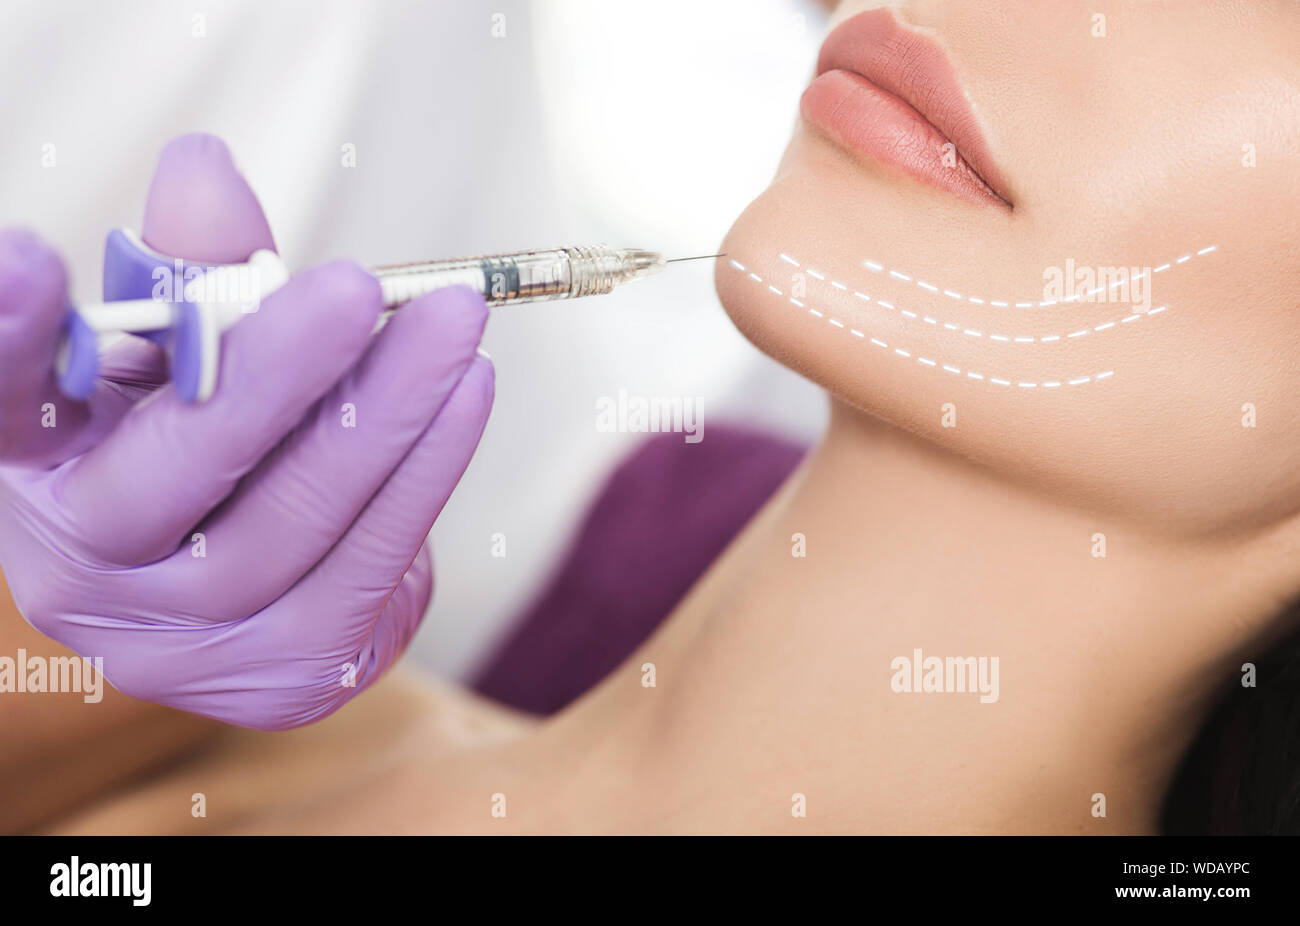 facelift chin and lower face using beauty injection, non surgery.Process lifting face contour close-up Stock Photo